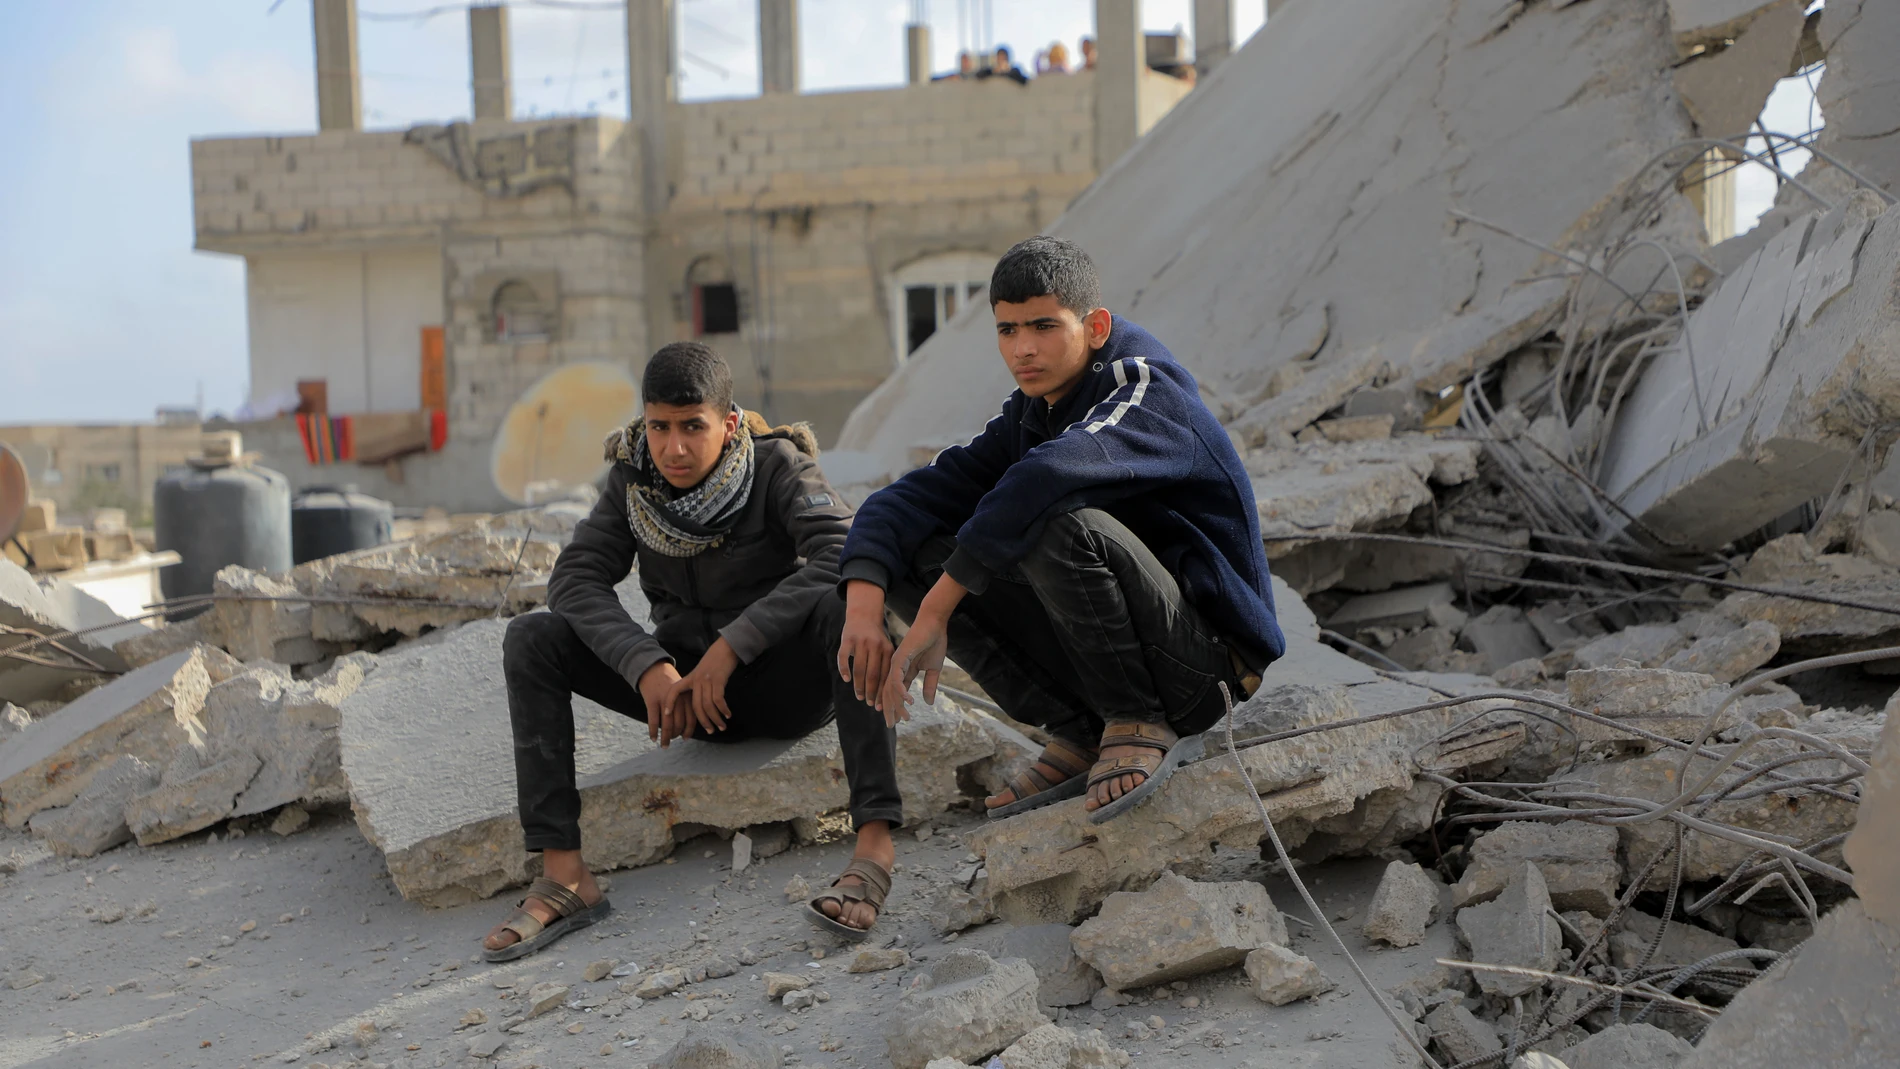 GAZA, April 22, 2024 -- Two men sit among rubble of destroyed buildings after an Israeli airstrike in the southern Gaza Strip city of Rafah, April 21, 2024. The Palestinian death toll from ongoing Israeli attacks on the Gaza Strip has risen to 34,097, the Hamas-run Health Ministry said in a statement on Sunday.21/04/2024